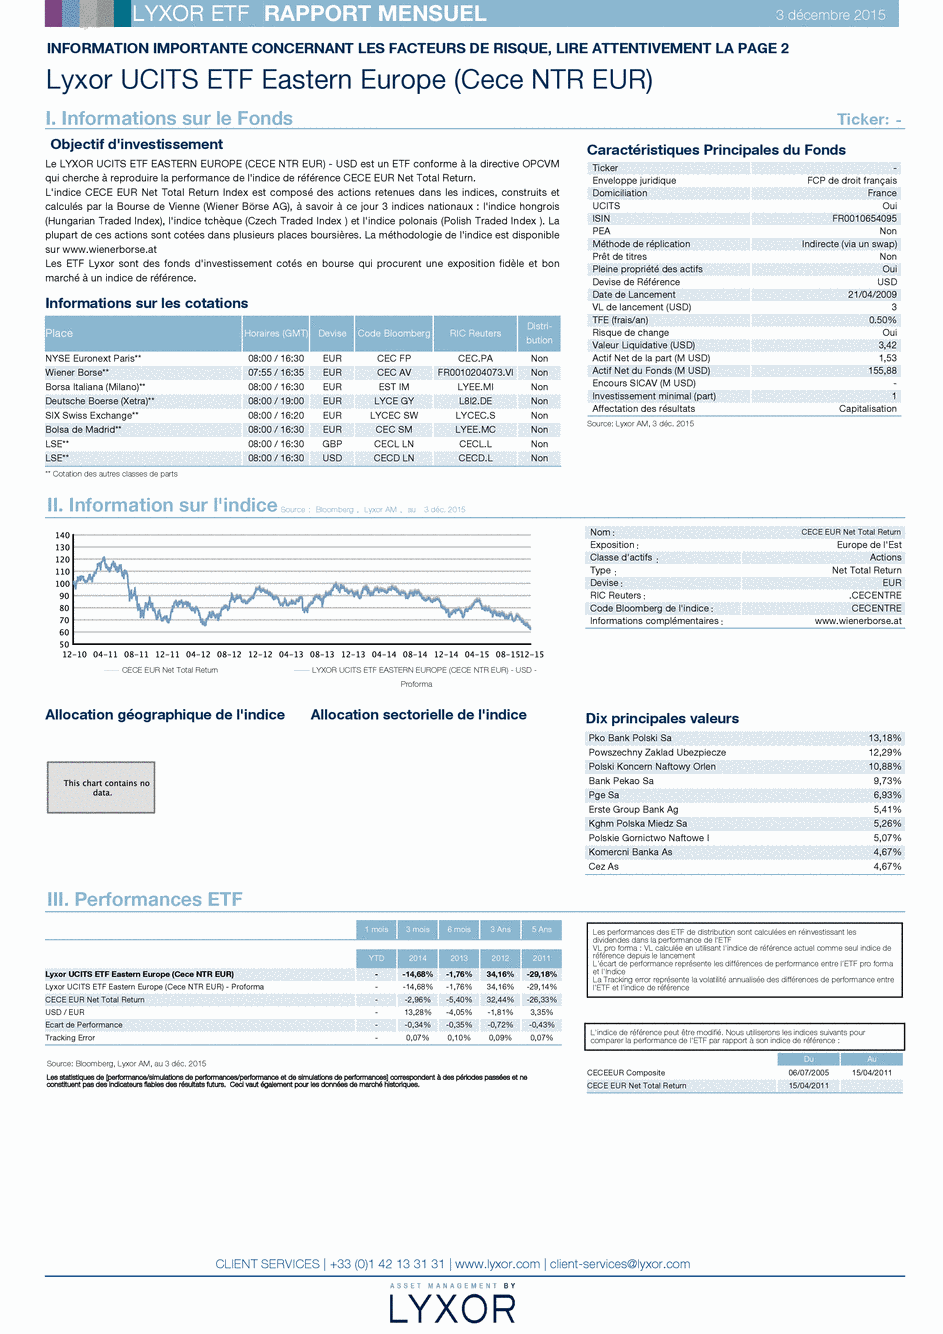 Reporting LYXOR UCITS ETF EASTERN EUROPE (CECE NTR EUR) USD - 03/12/2015 - Français